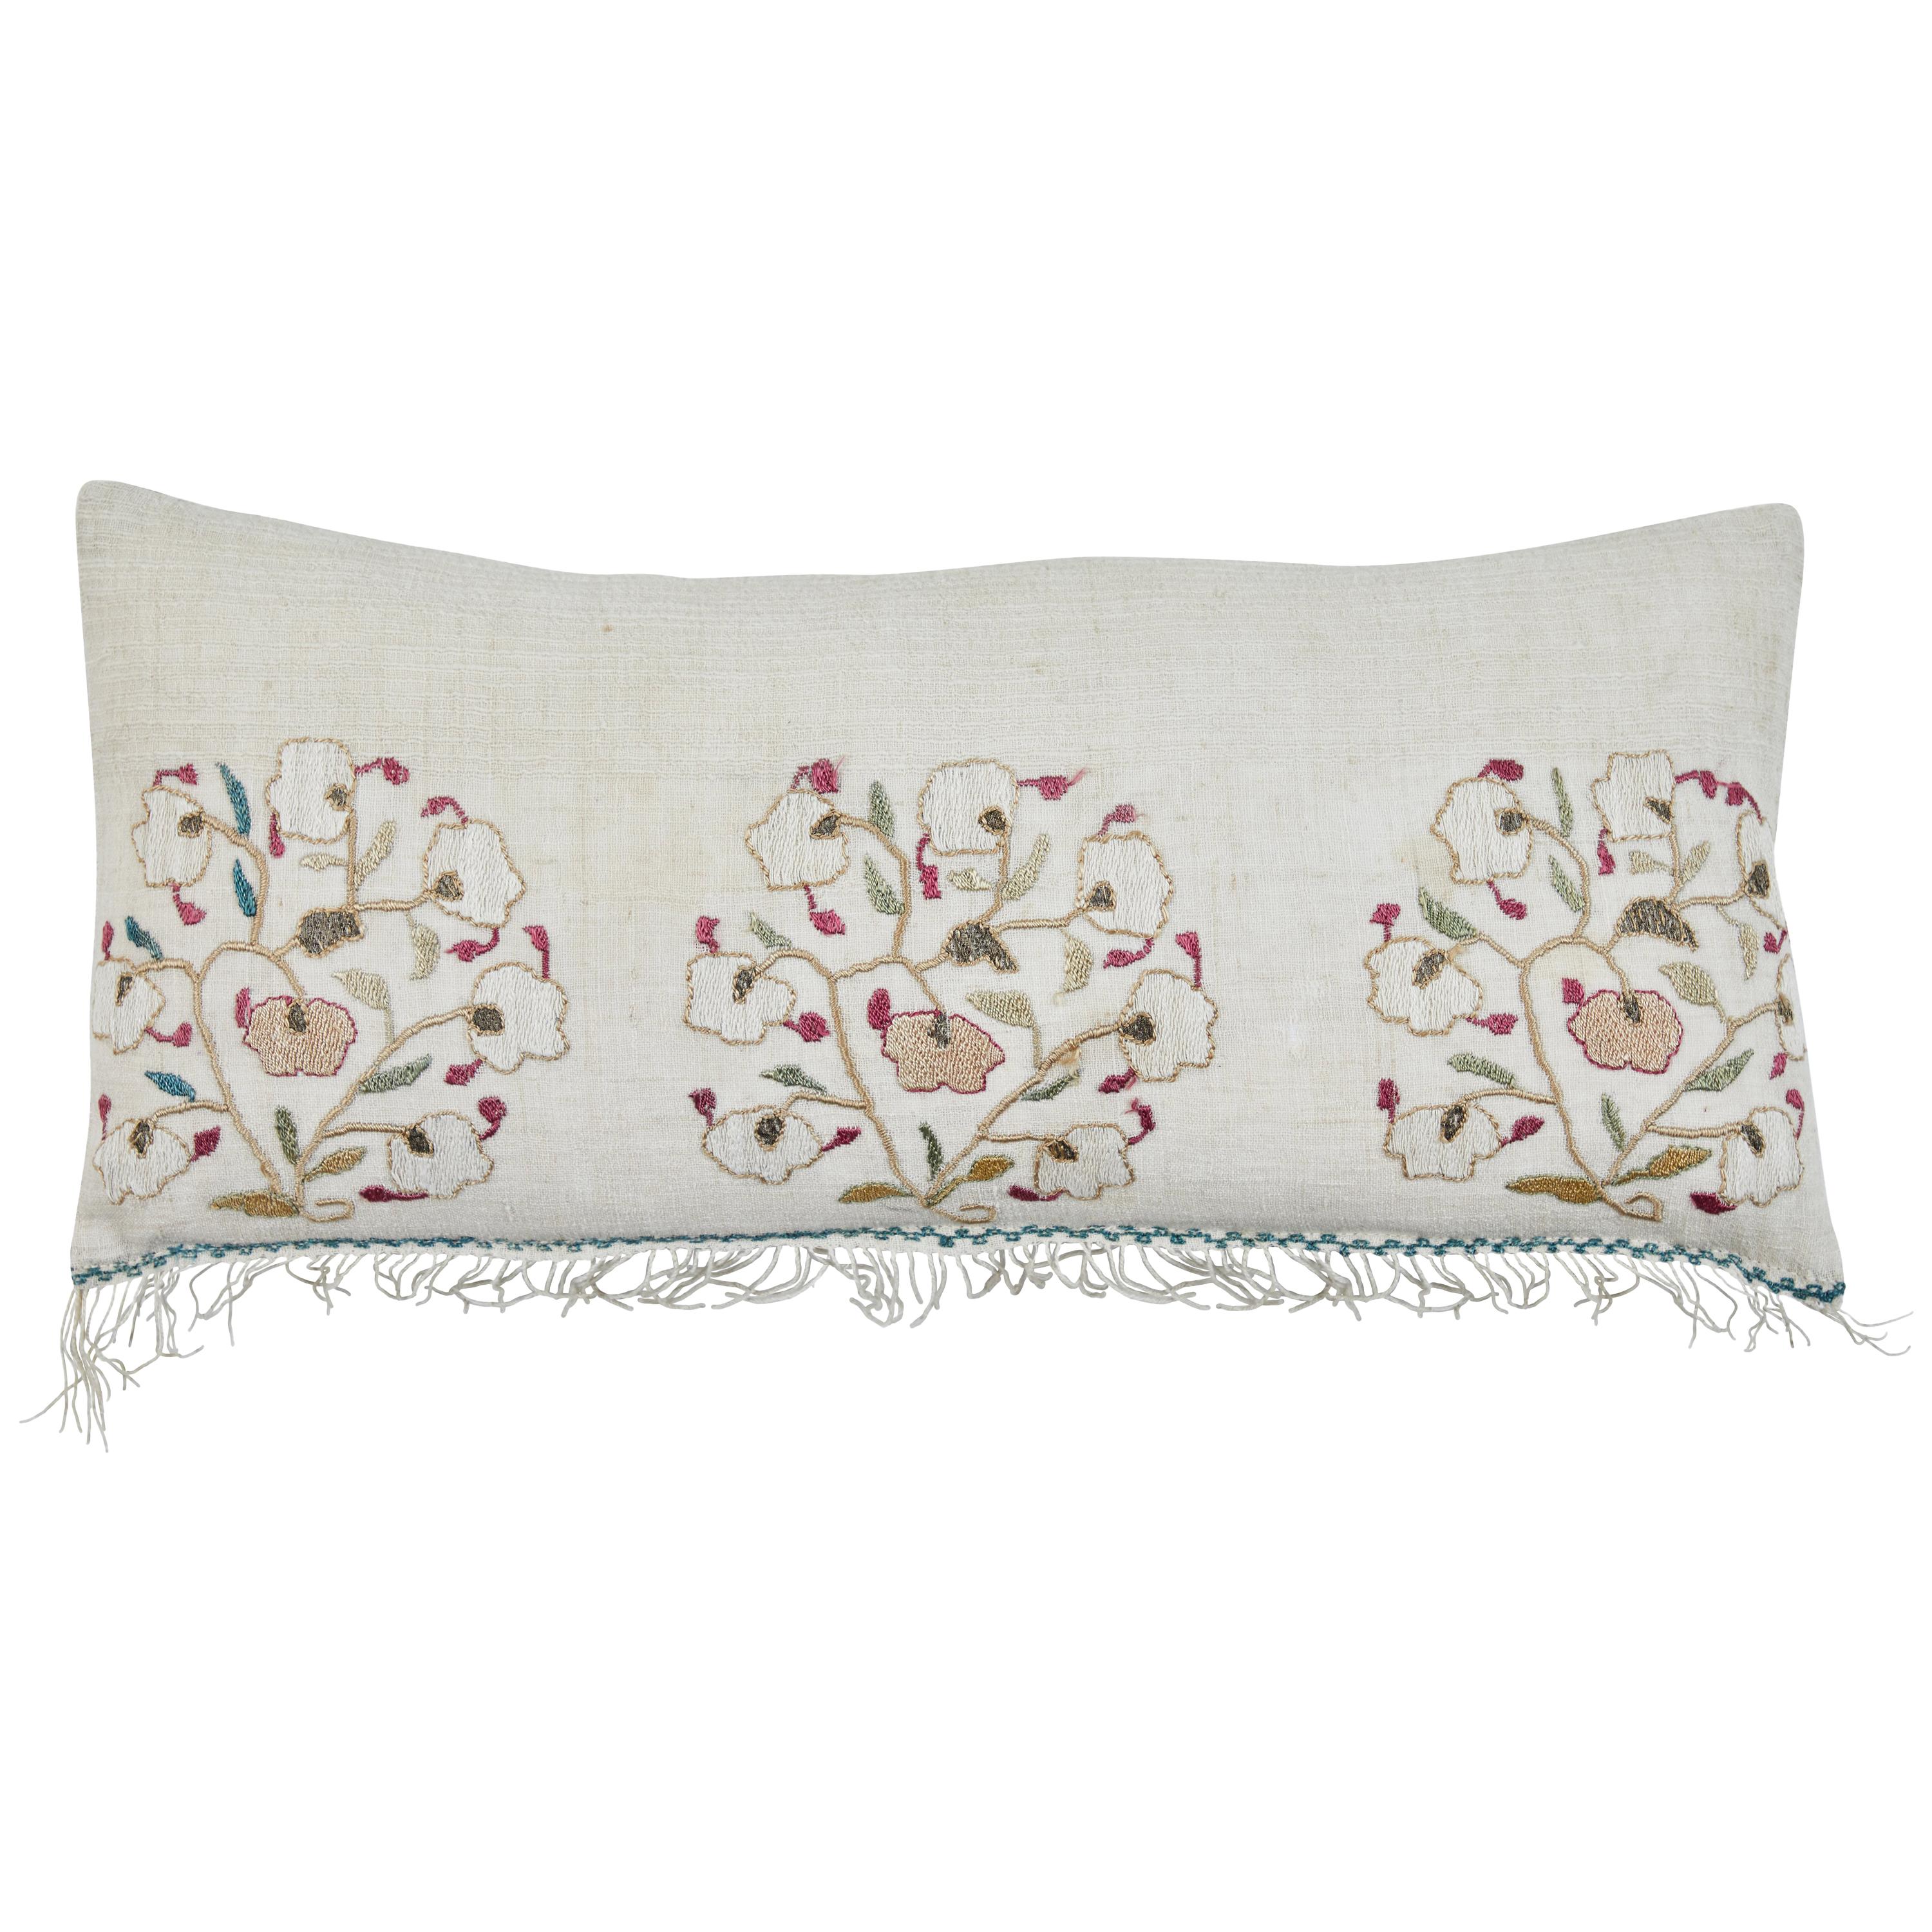 Antique Ottoman Turkish Embroidery Pillow For Sale